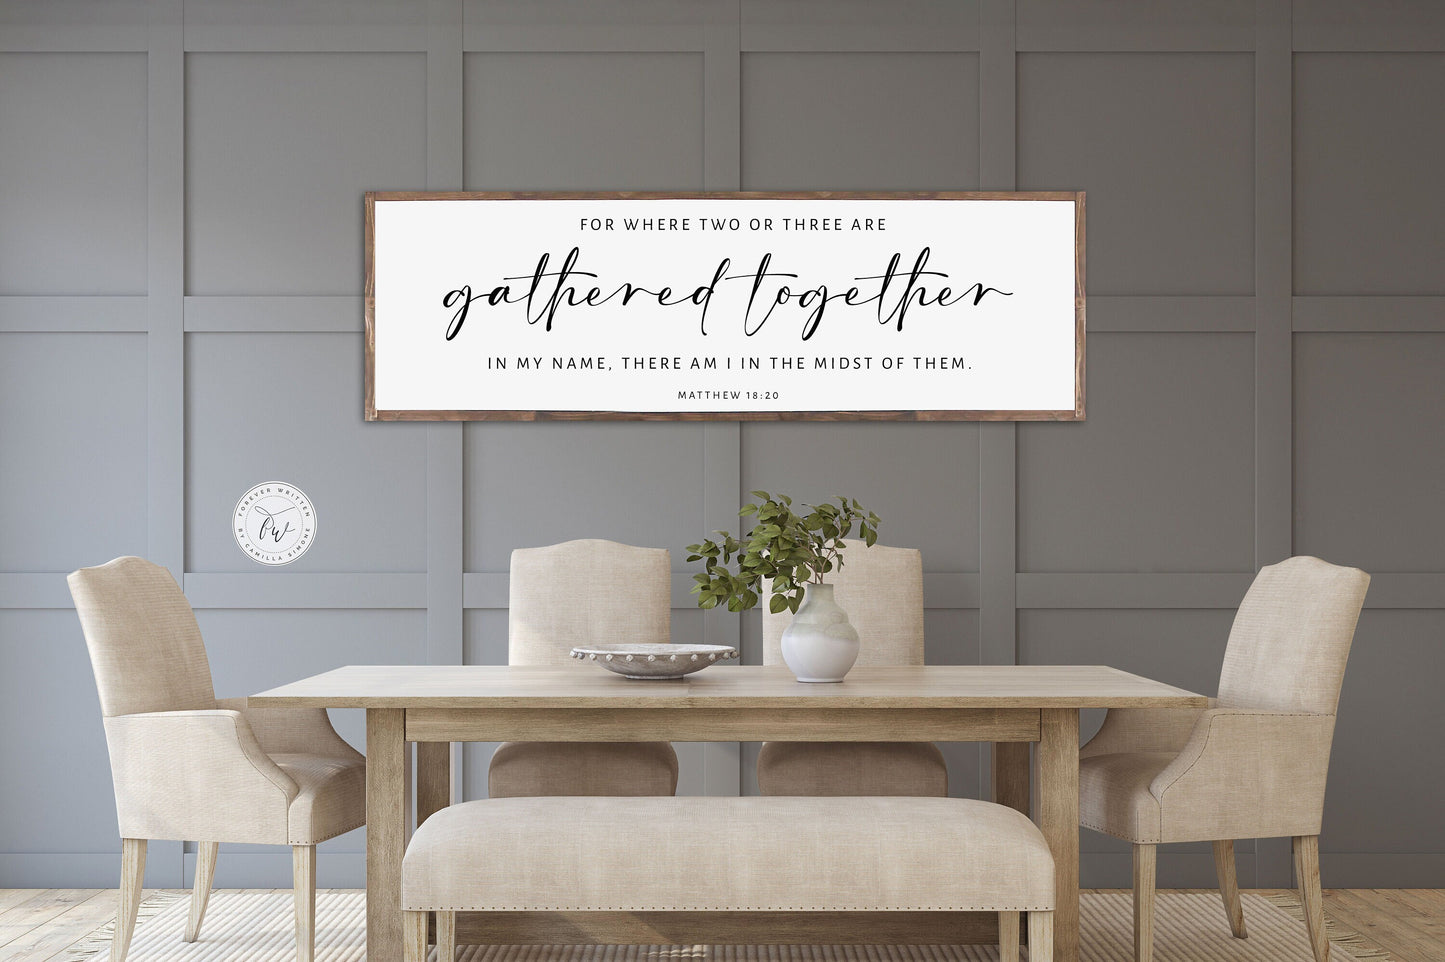 Gathered Together Scripture, Rustic Farmhouse house, handmade sign, by Forever Written